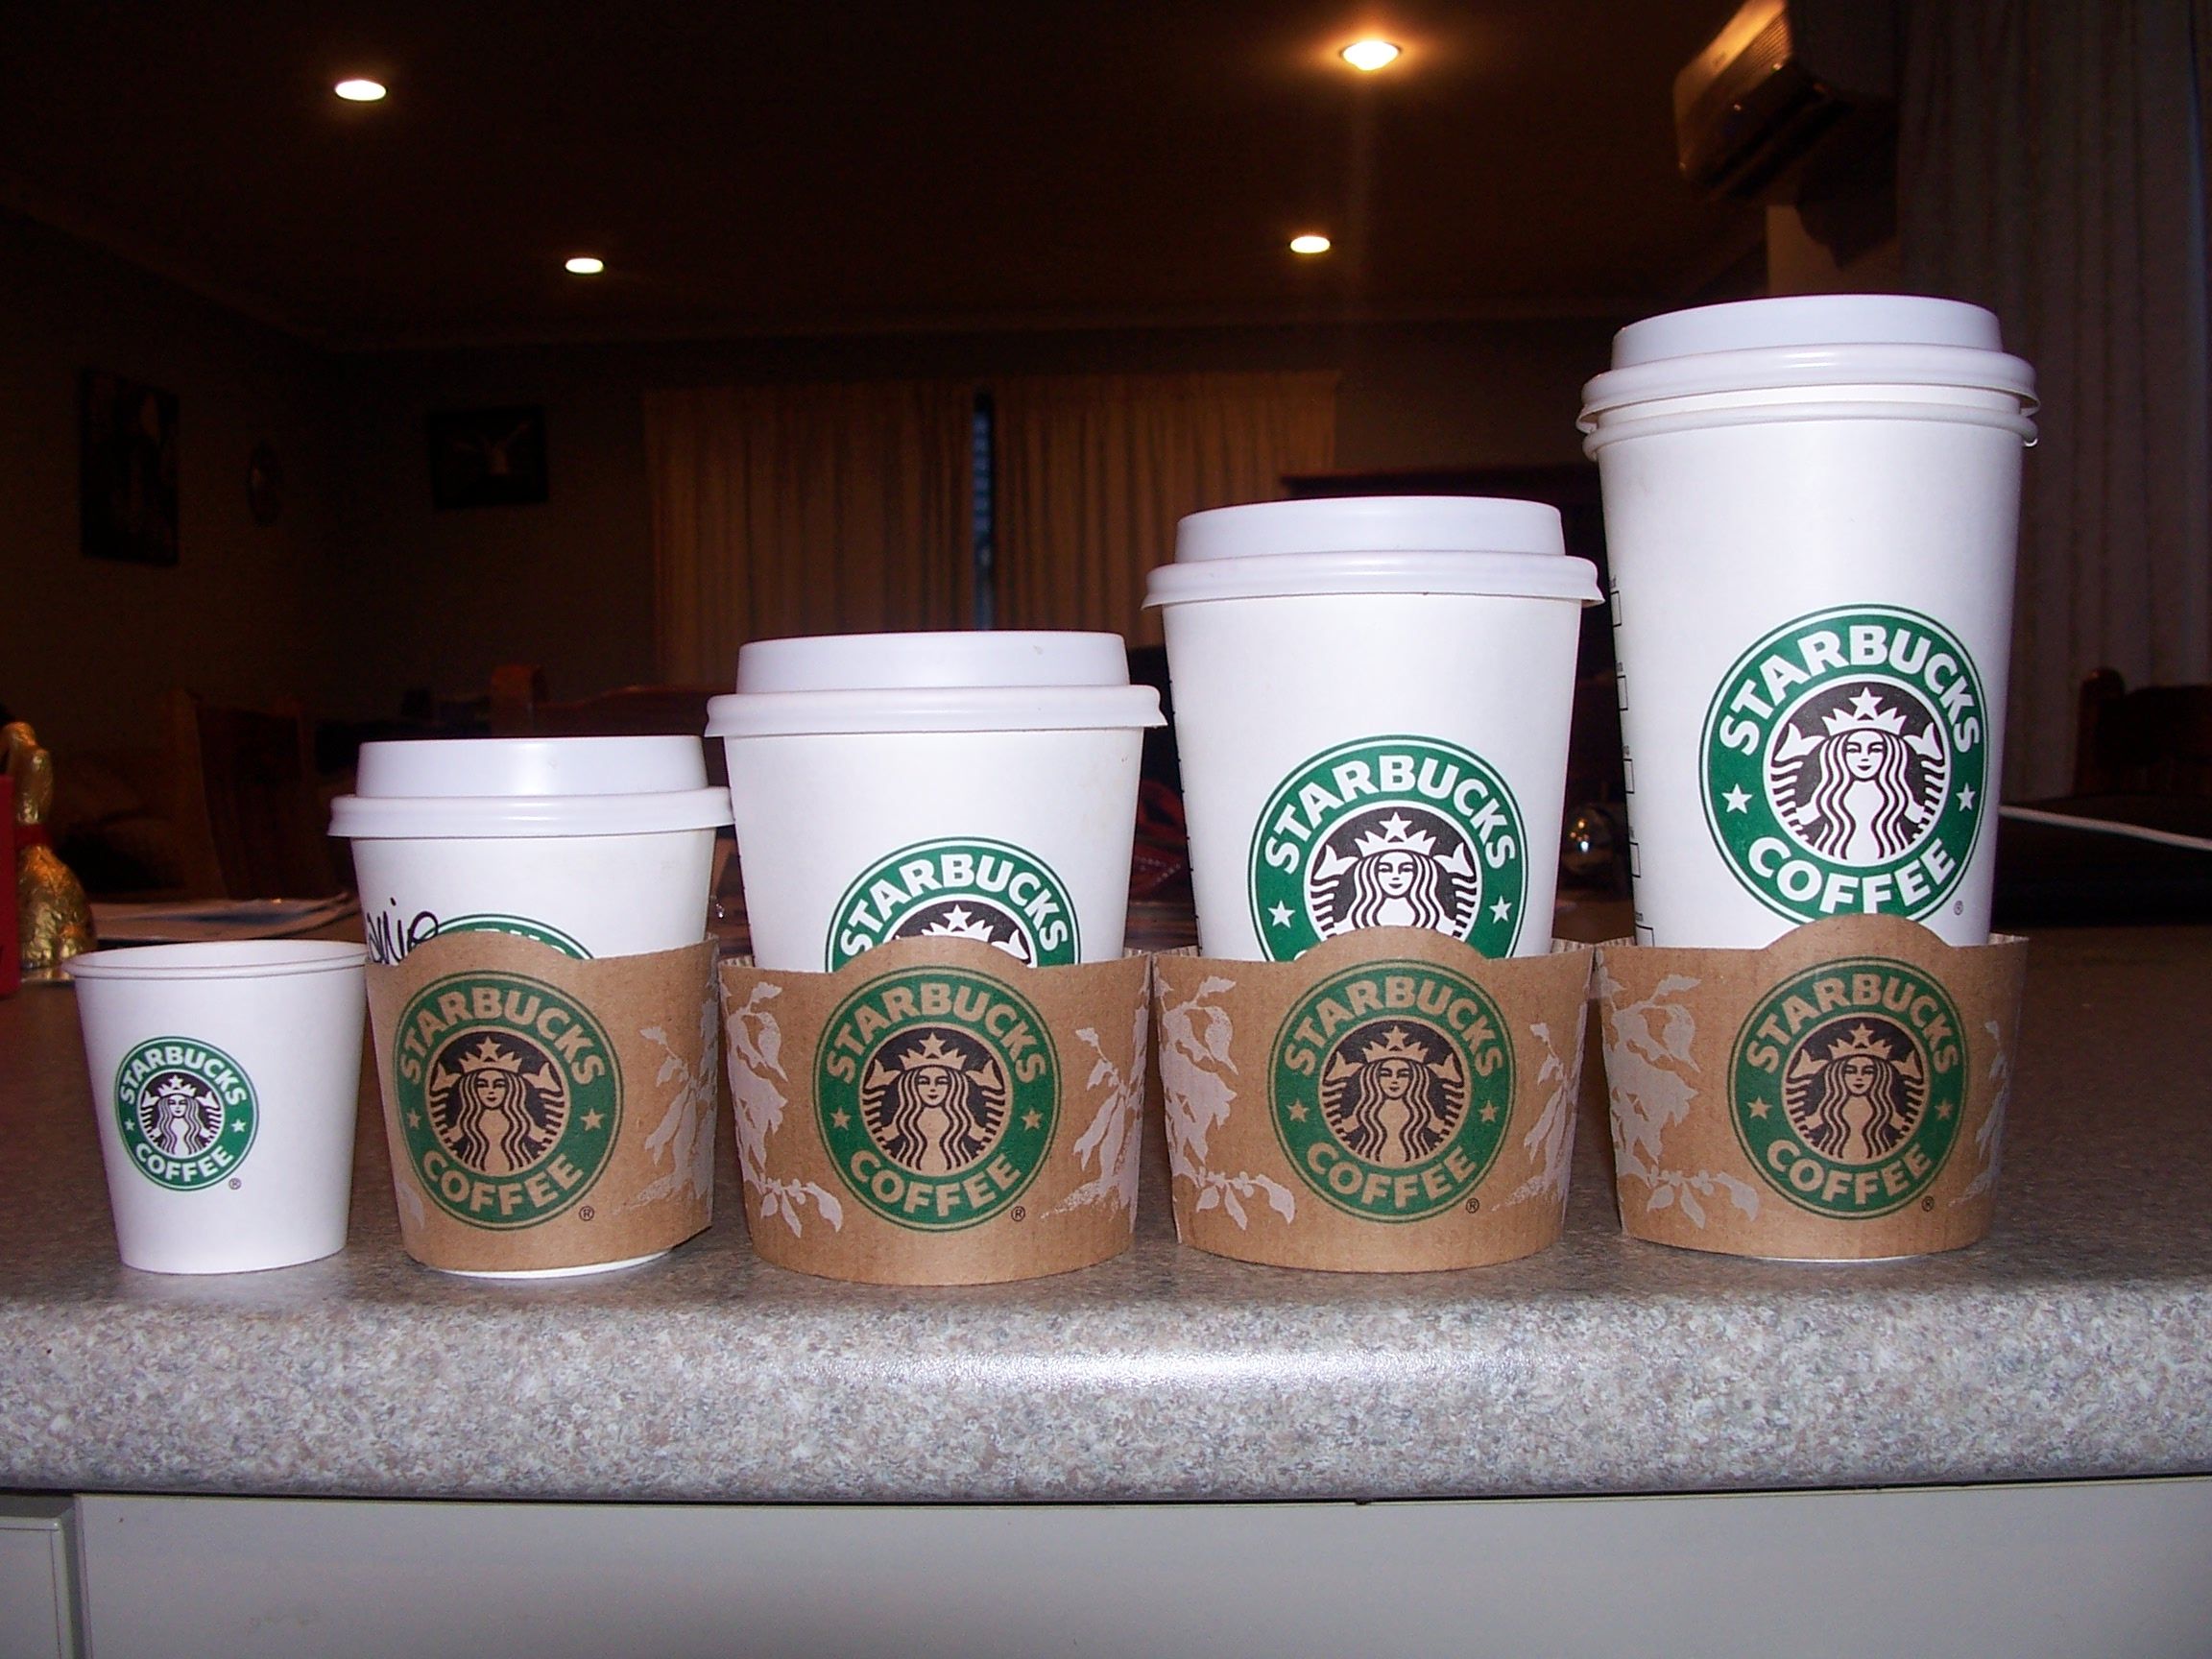 Artistic Starbucks Coffee Wallpaper with Various Cup Size Wallpaper. Wallpaper Download. High Resolution Wallpaper